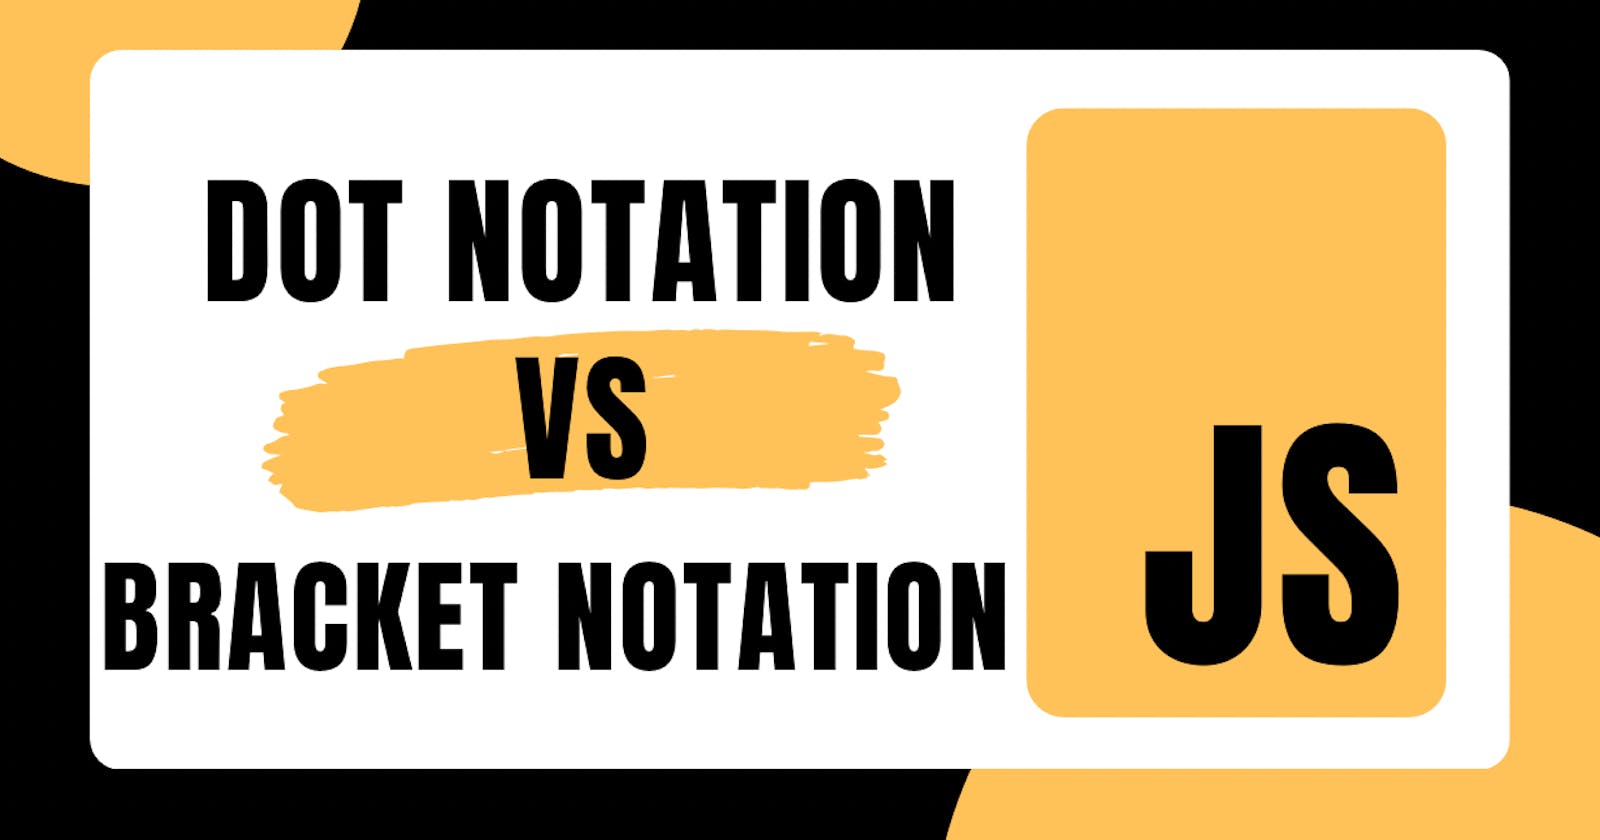 Accessing Objects in JavaScript: Dot Notation vs Bracket Notation